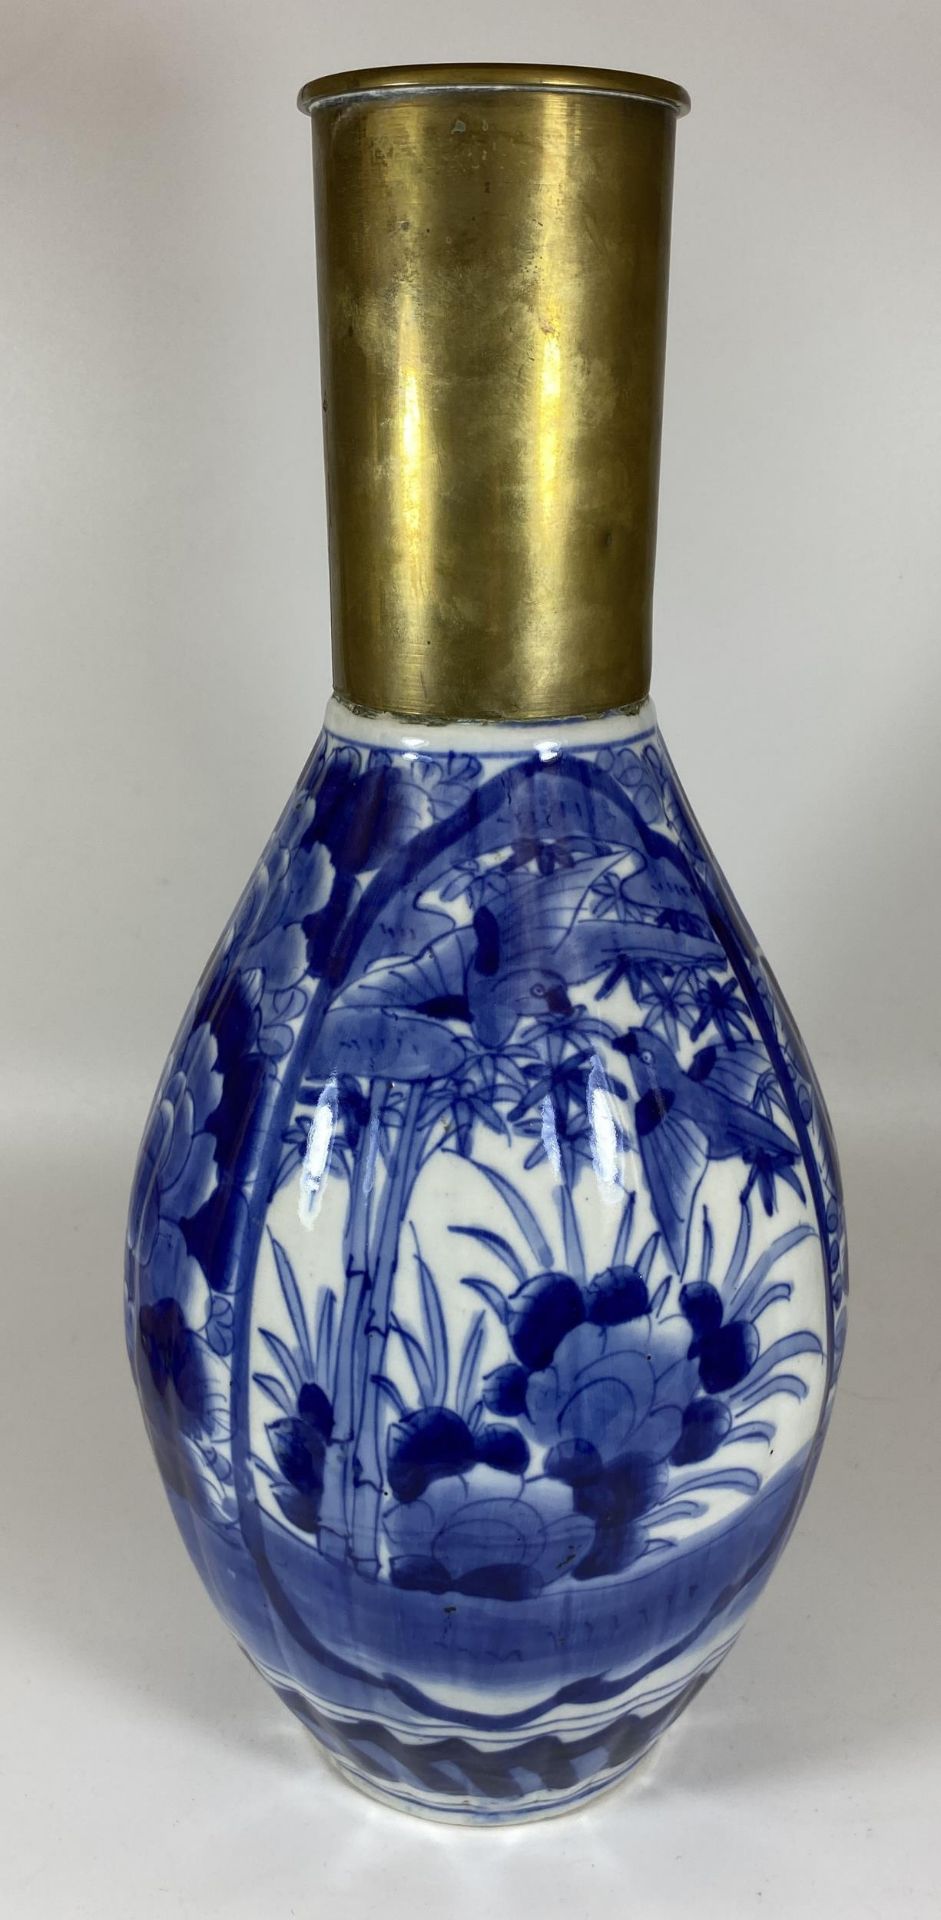 A LARGE JAPANESE MEIJI PERIOD (1868-1912) BLUE AND WHITE FLORAL DESIGN VASE WITH CONVERTED TRENCH